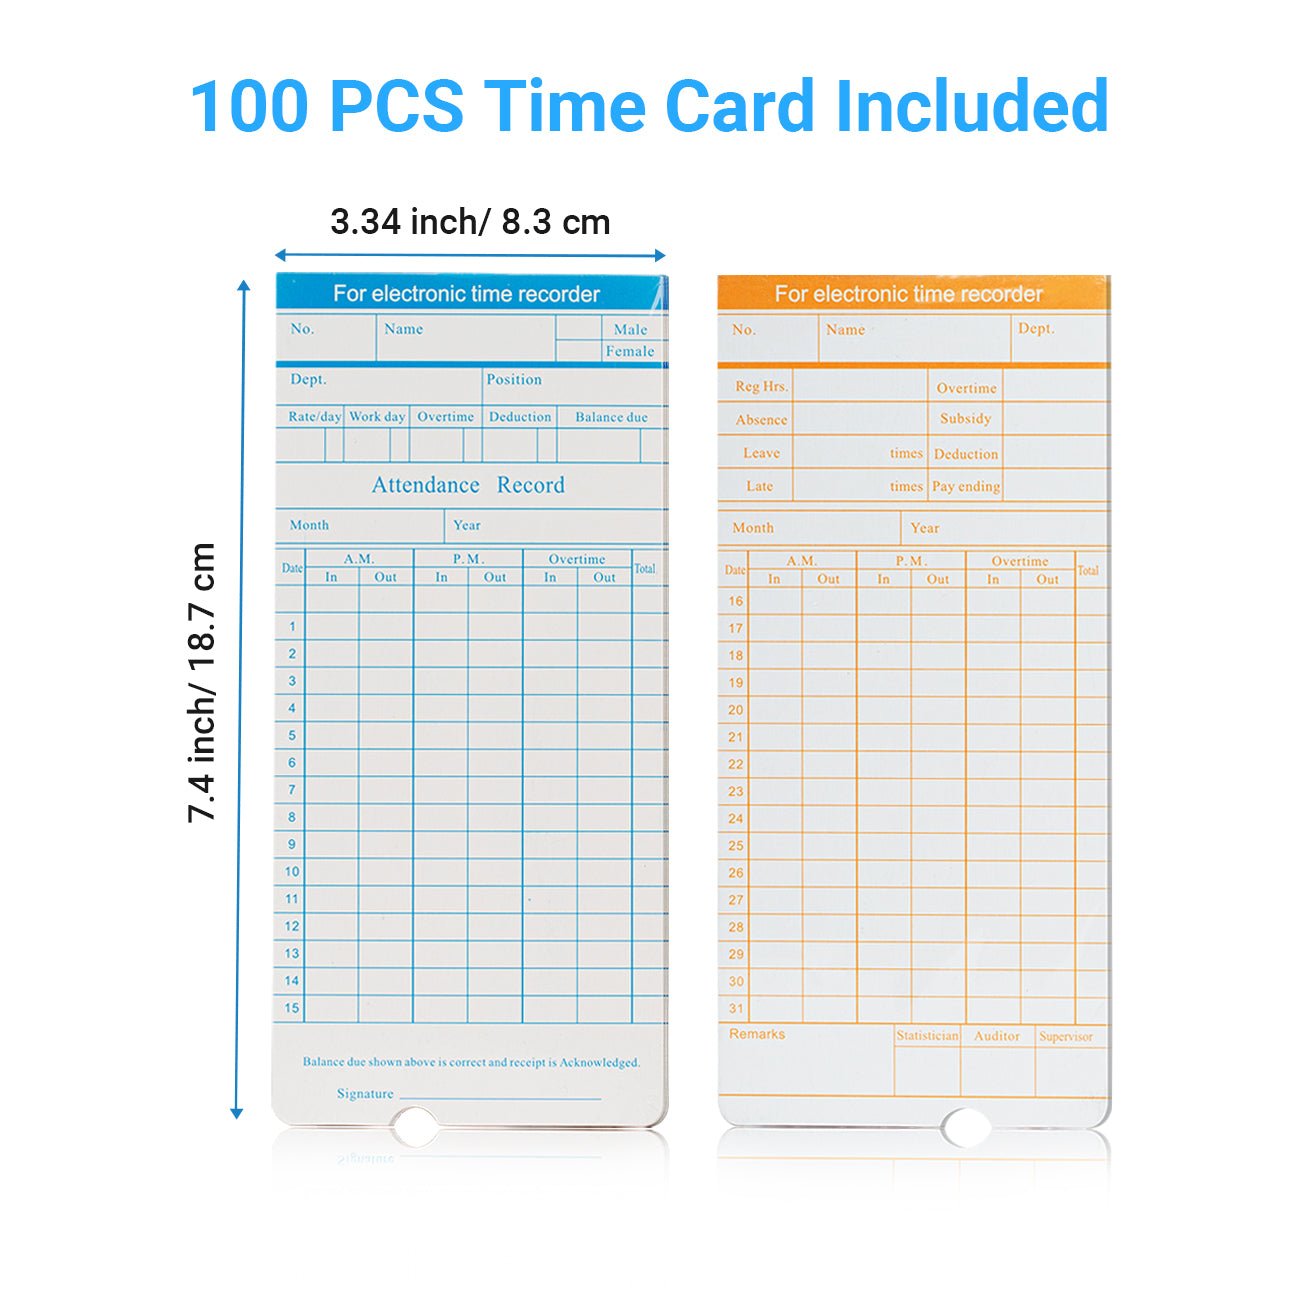 tera-attendance-time-card-physical-dimension